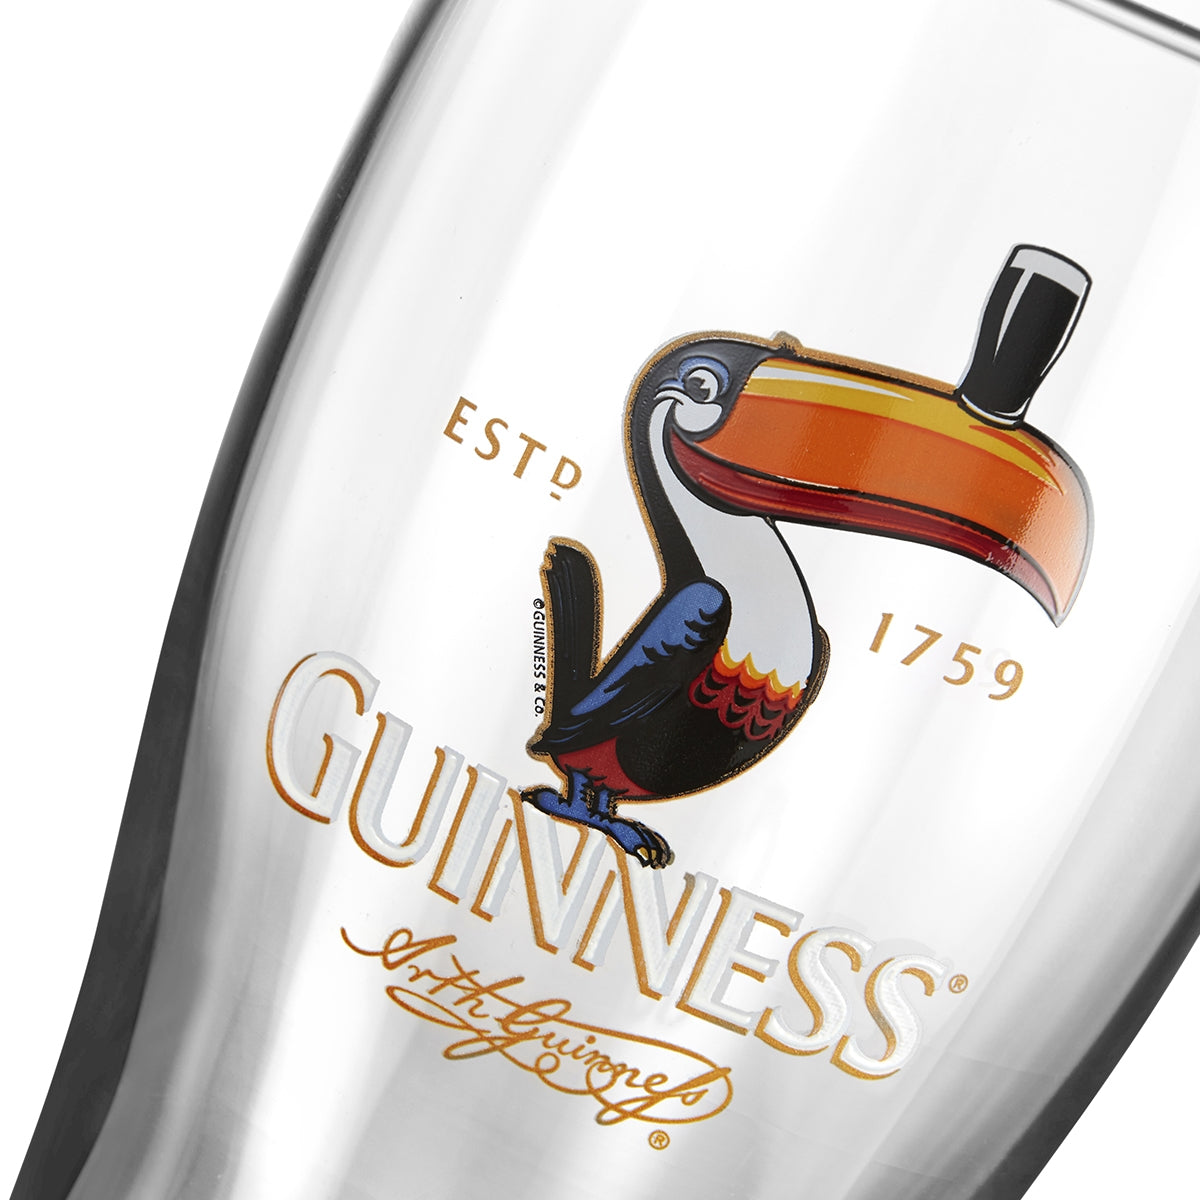 Drinking glass with a Guinness Toucan Pint Glass - 4 Pack from Guinness UK.